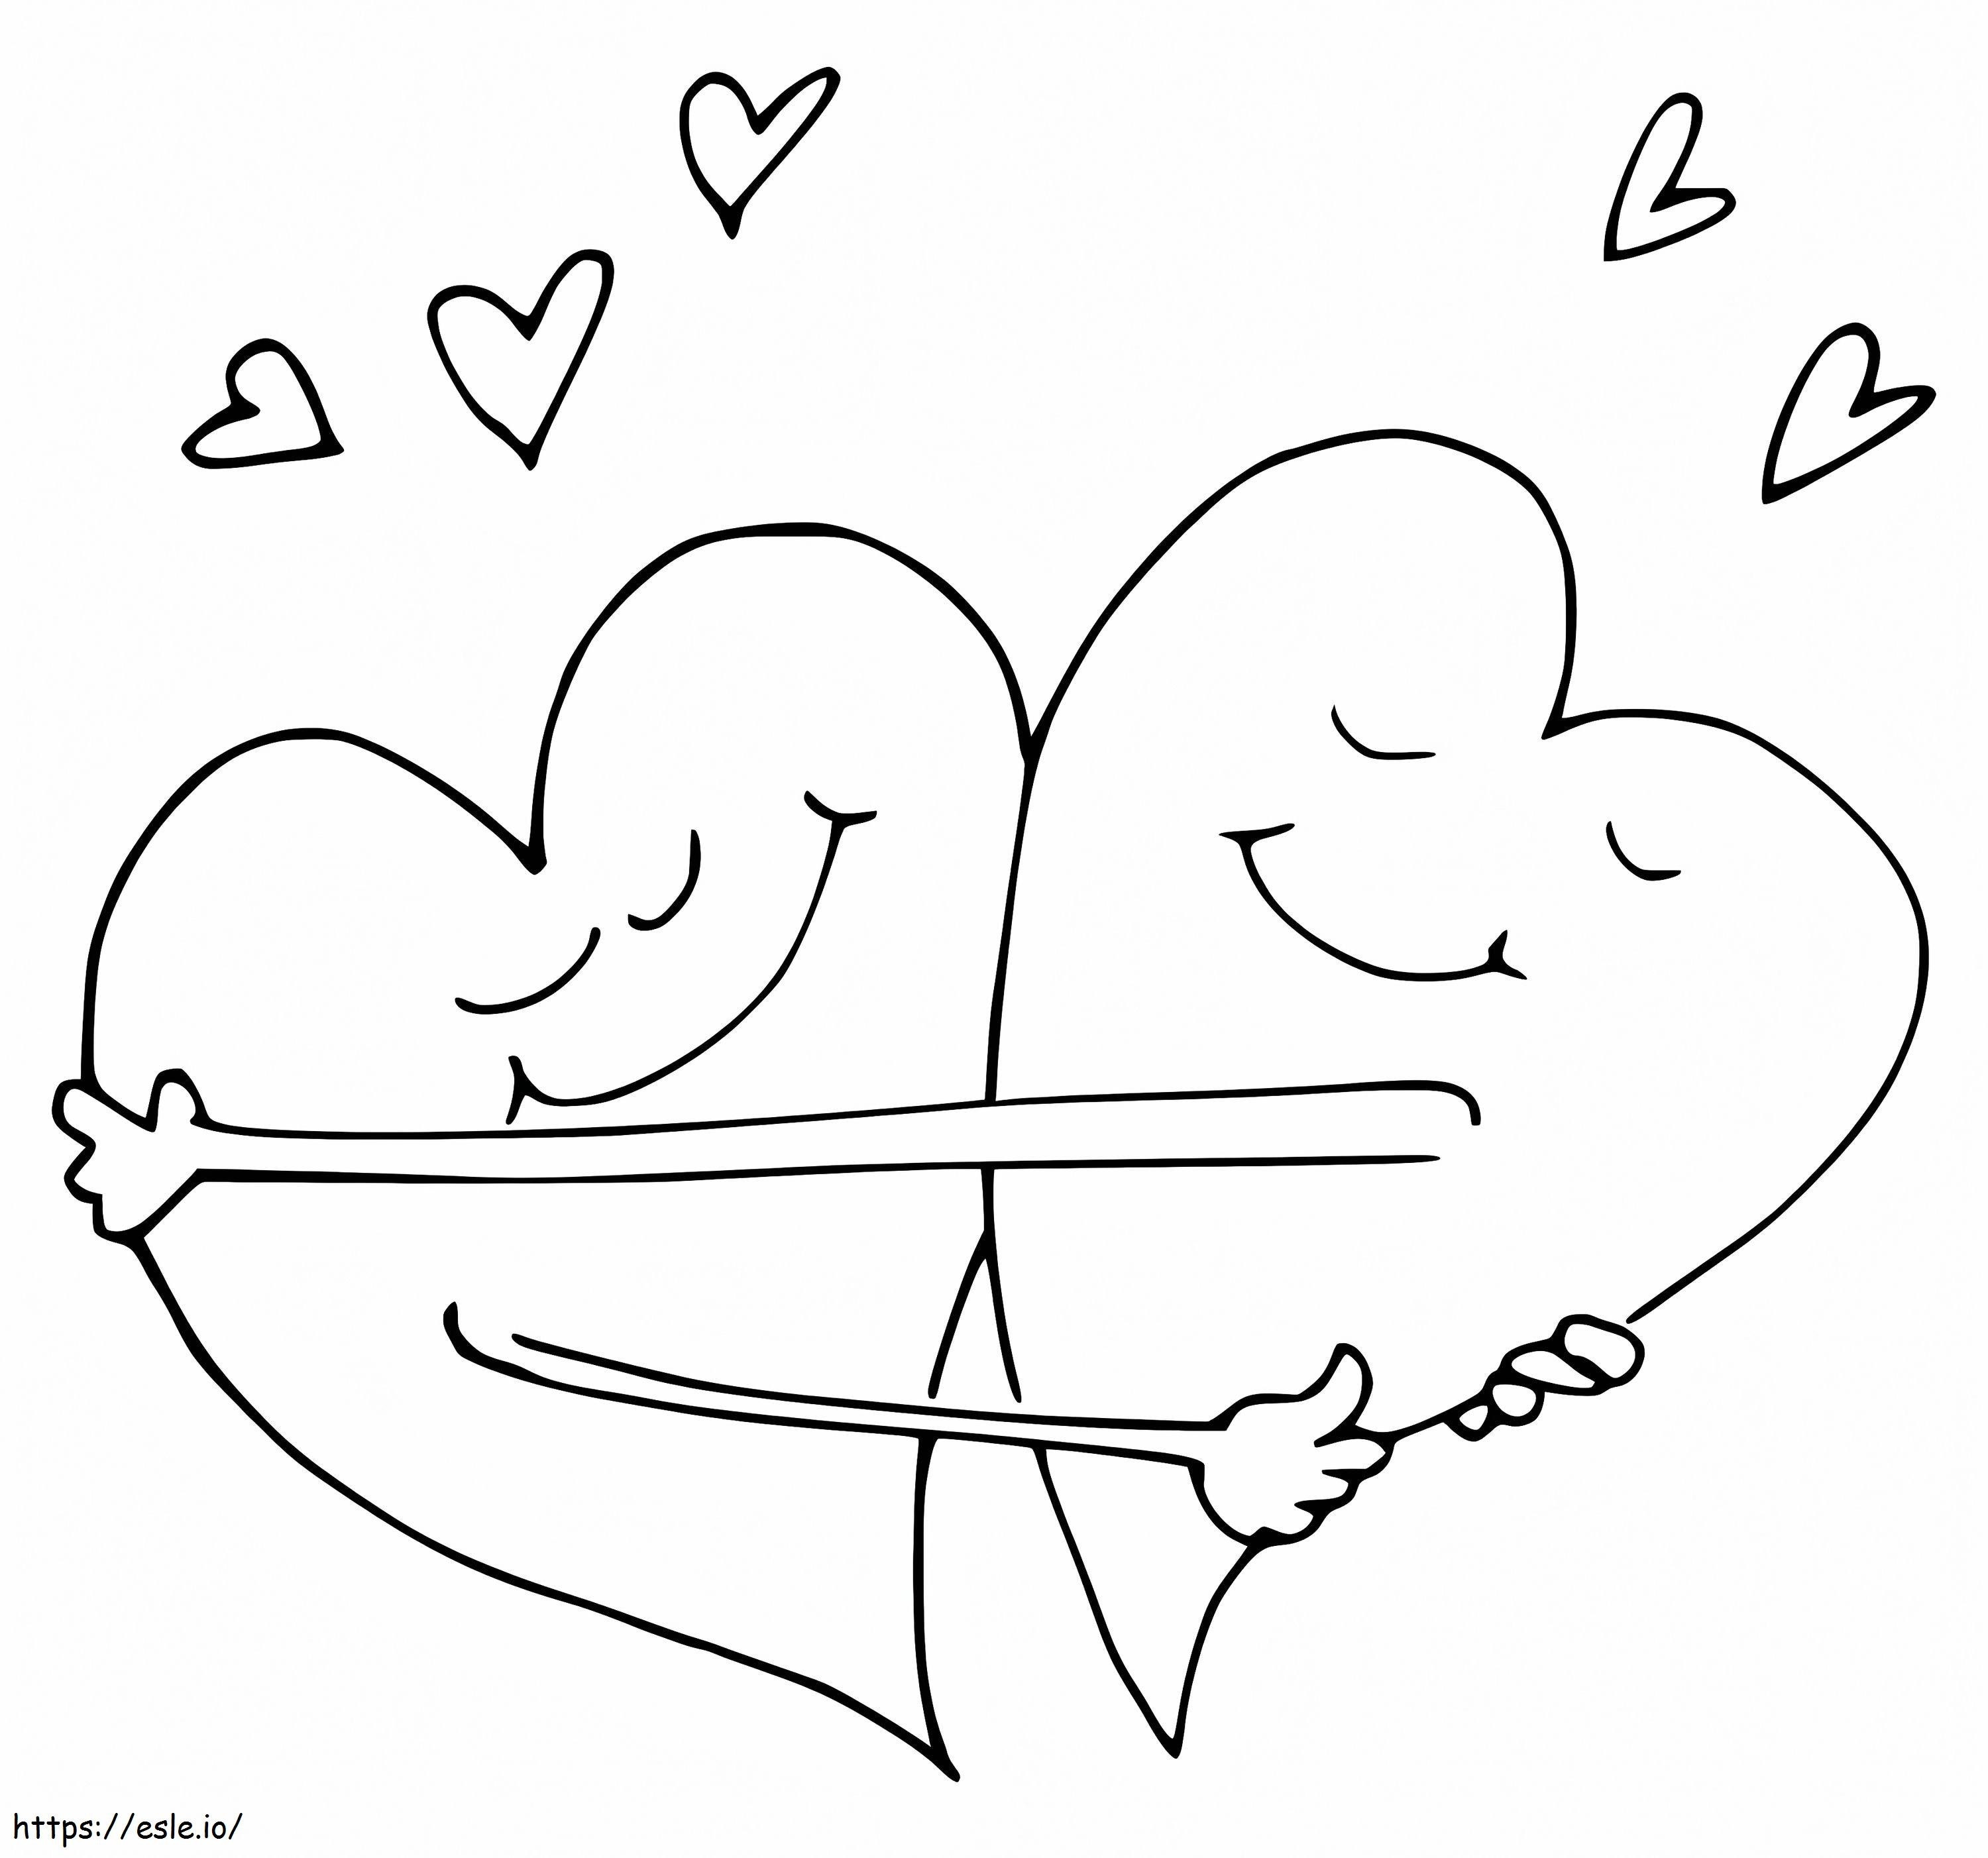 Heart Couple coloring page